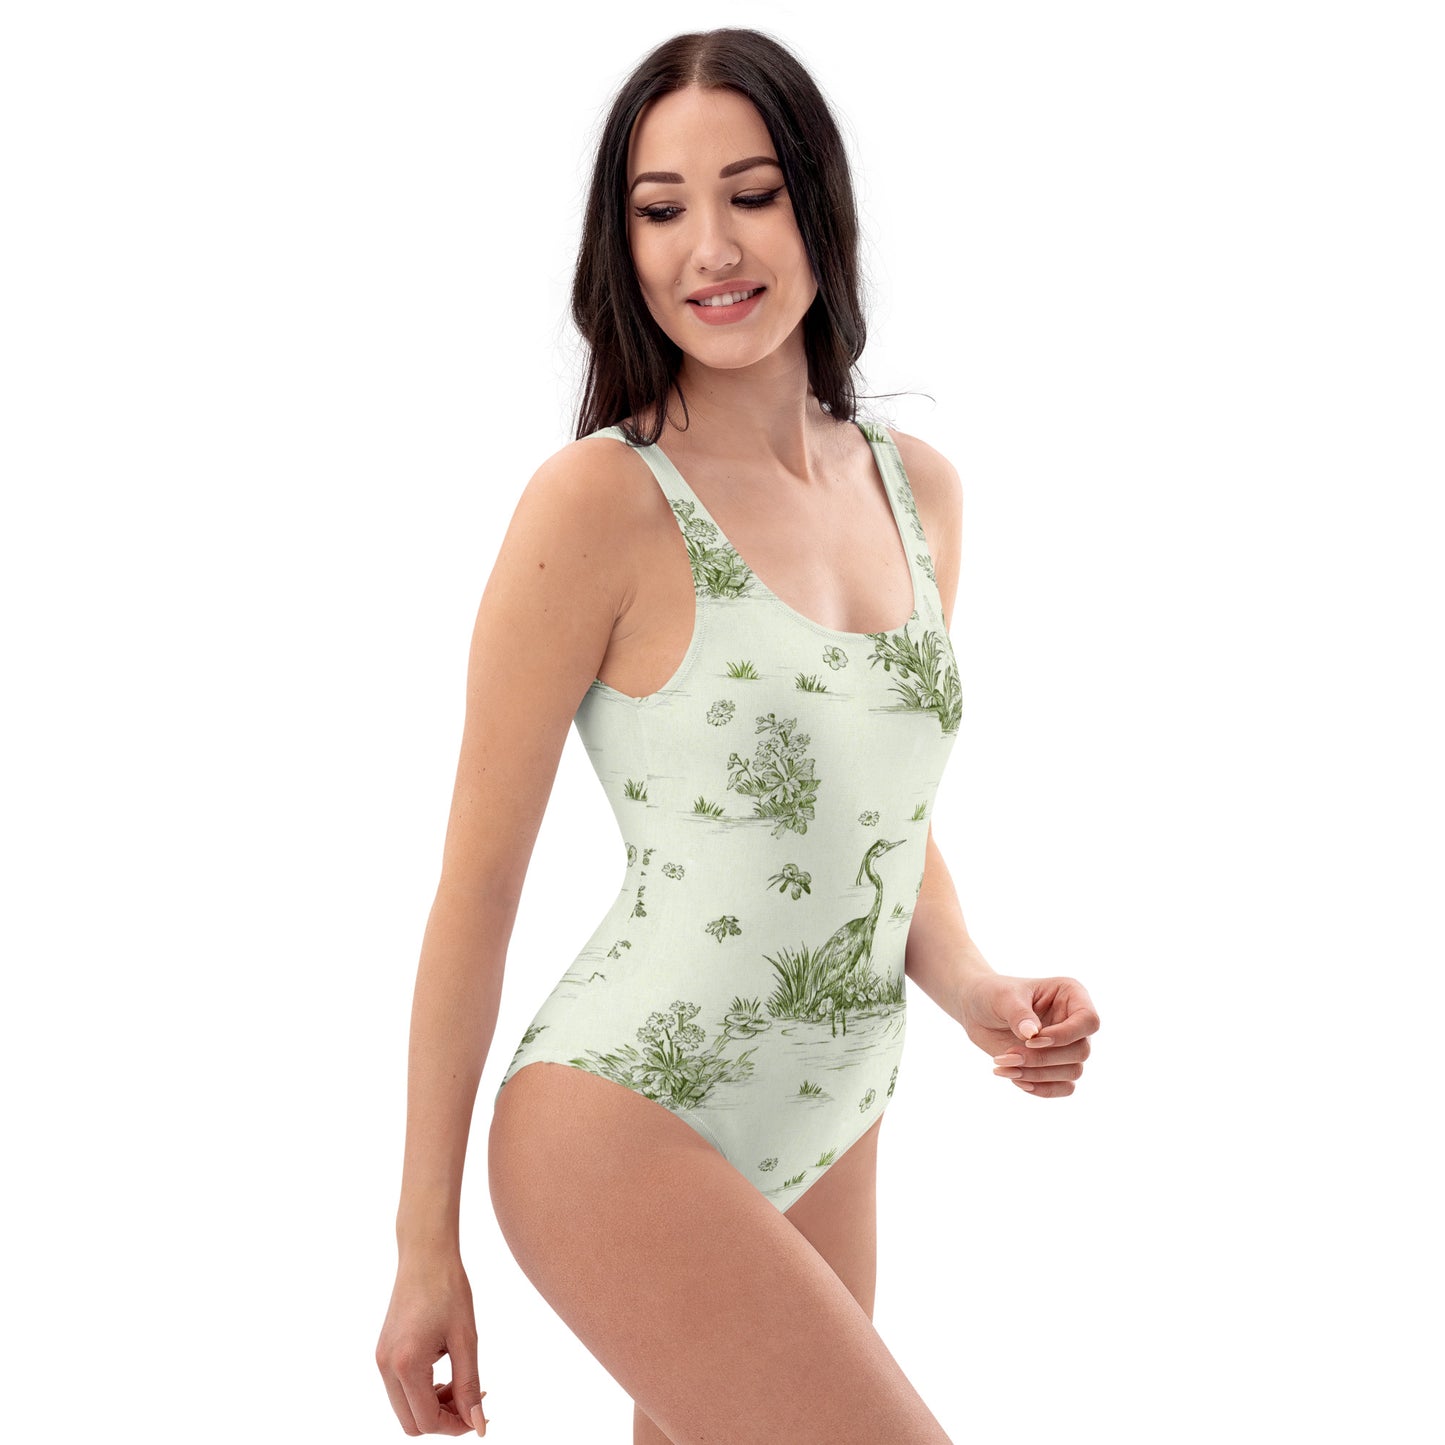 Toiles de Jouy tree Hugging Forest Green One-Piece Swimsuit